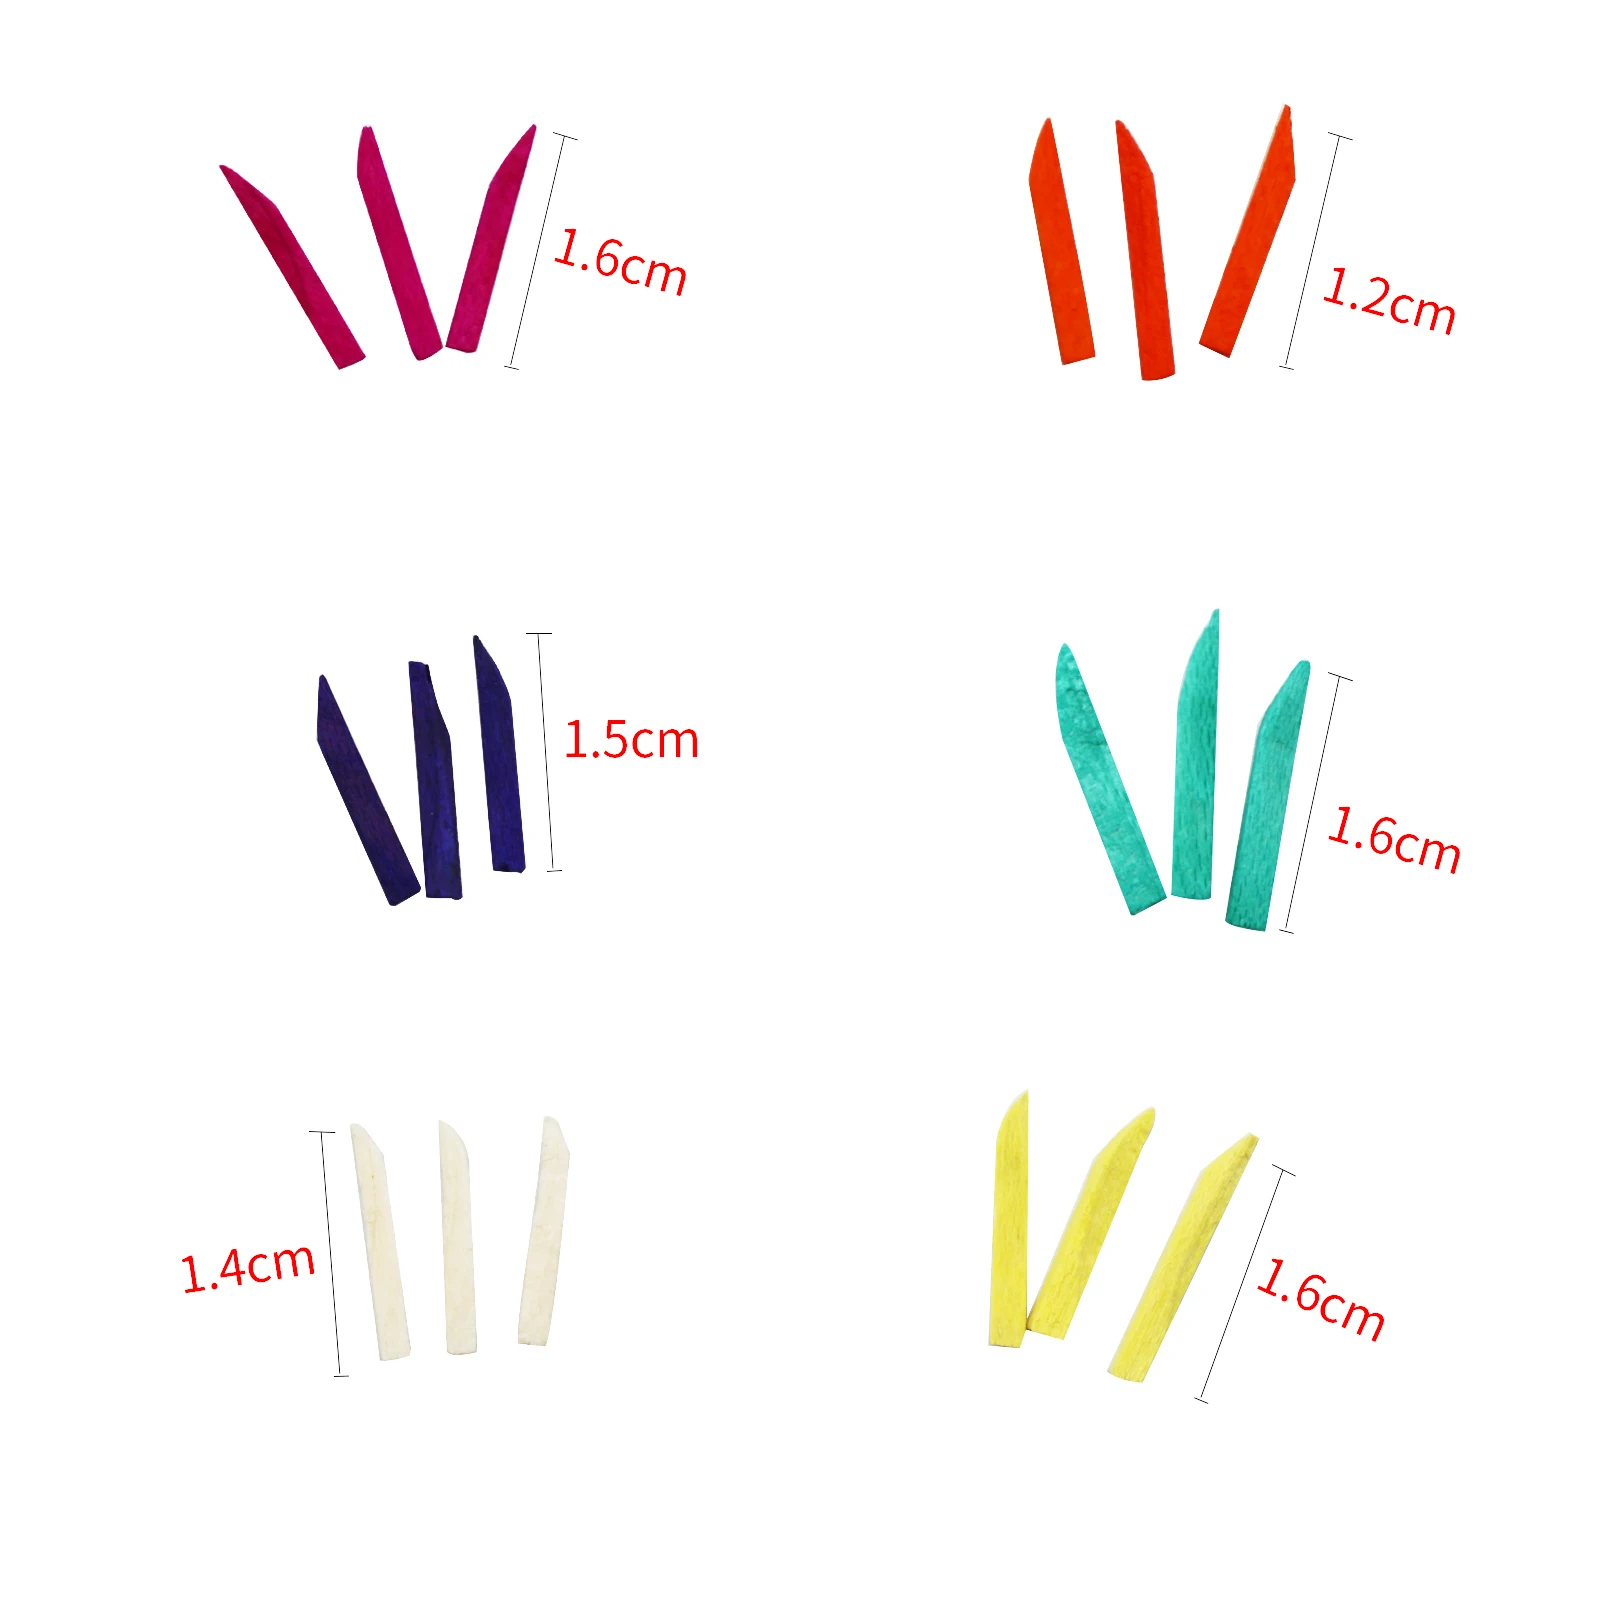 100Pcs/set Portable Disposable Dental Wedges Dentist Tool Tooth Gap Wedges Specially Treated Tip Avoid Damaging the Gums